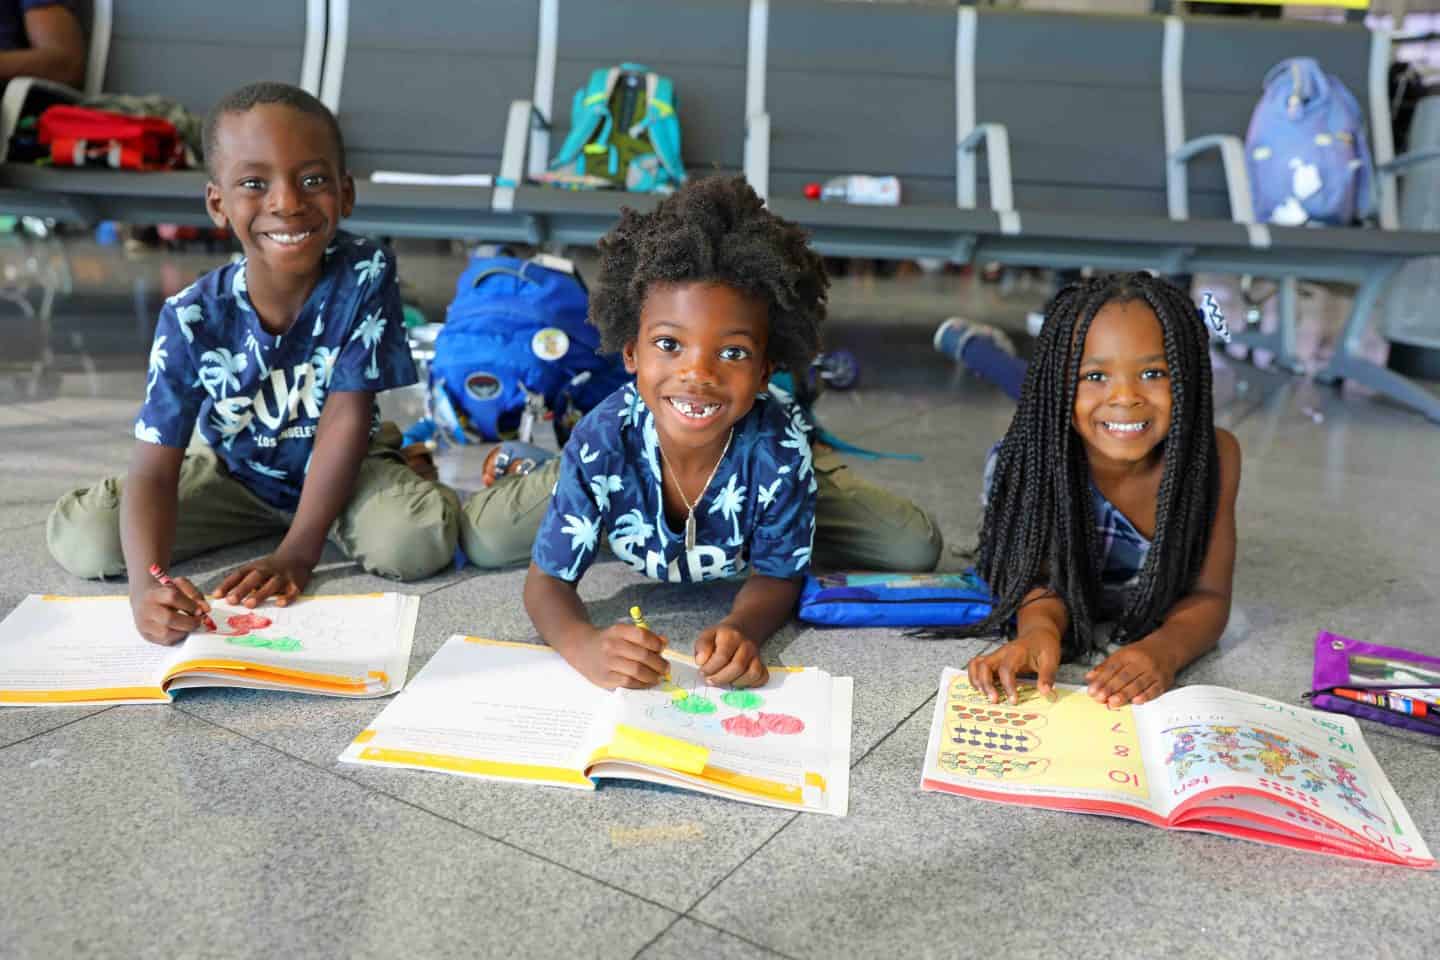 A Comprehensive Resource Guide For Black Homeschooling Families